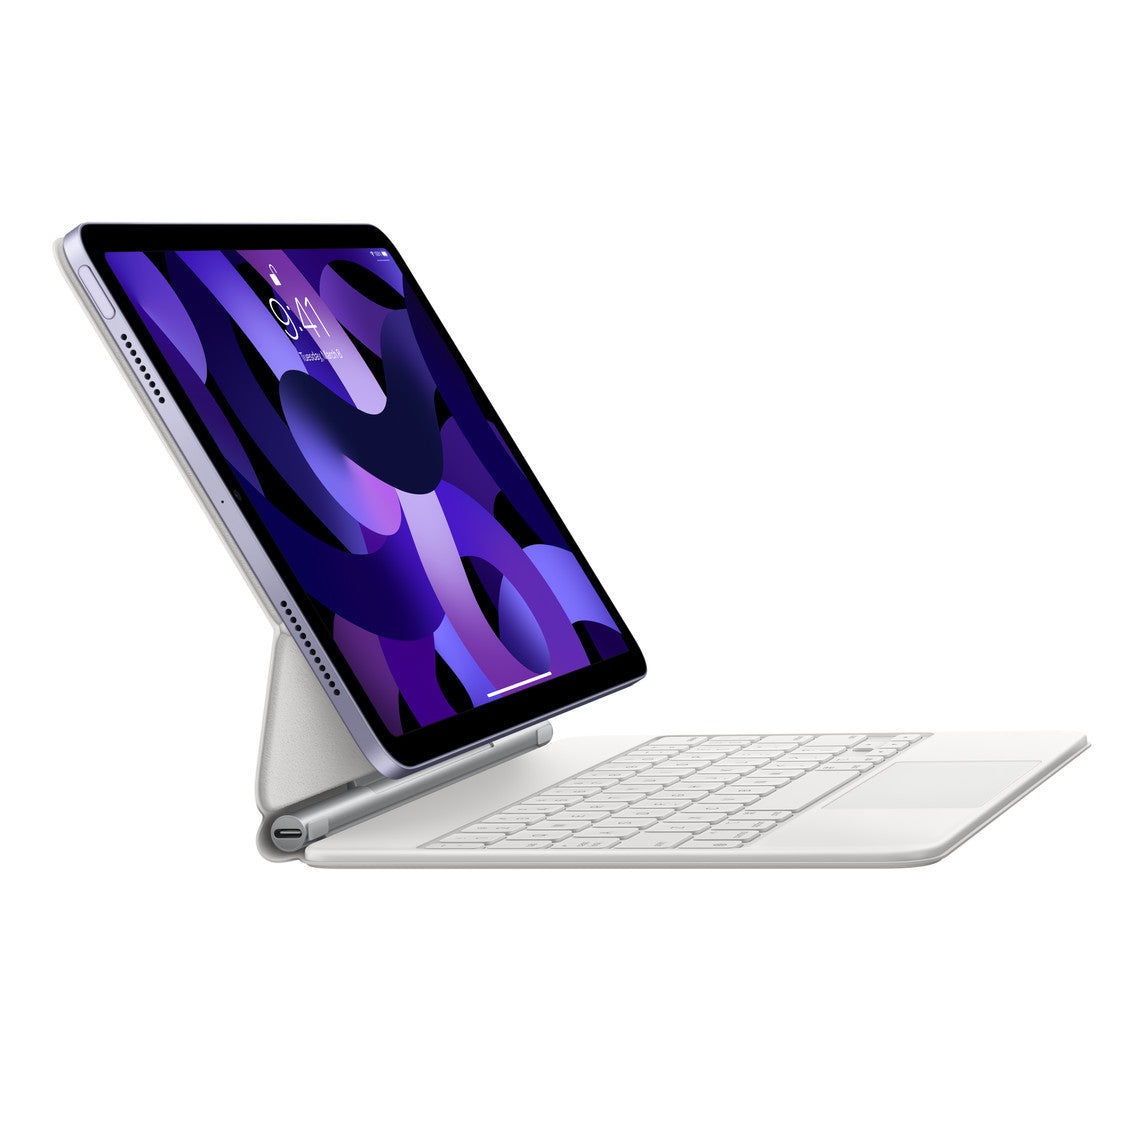 Magic Keyboard for iPad Pro 11-inch (4th generation) and iPad Air (5th generation) - US English - White